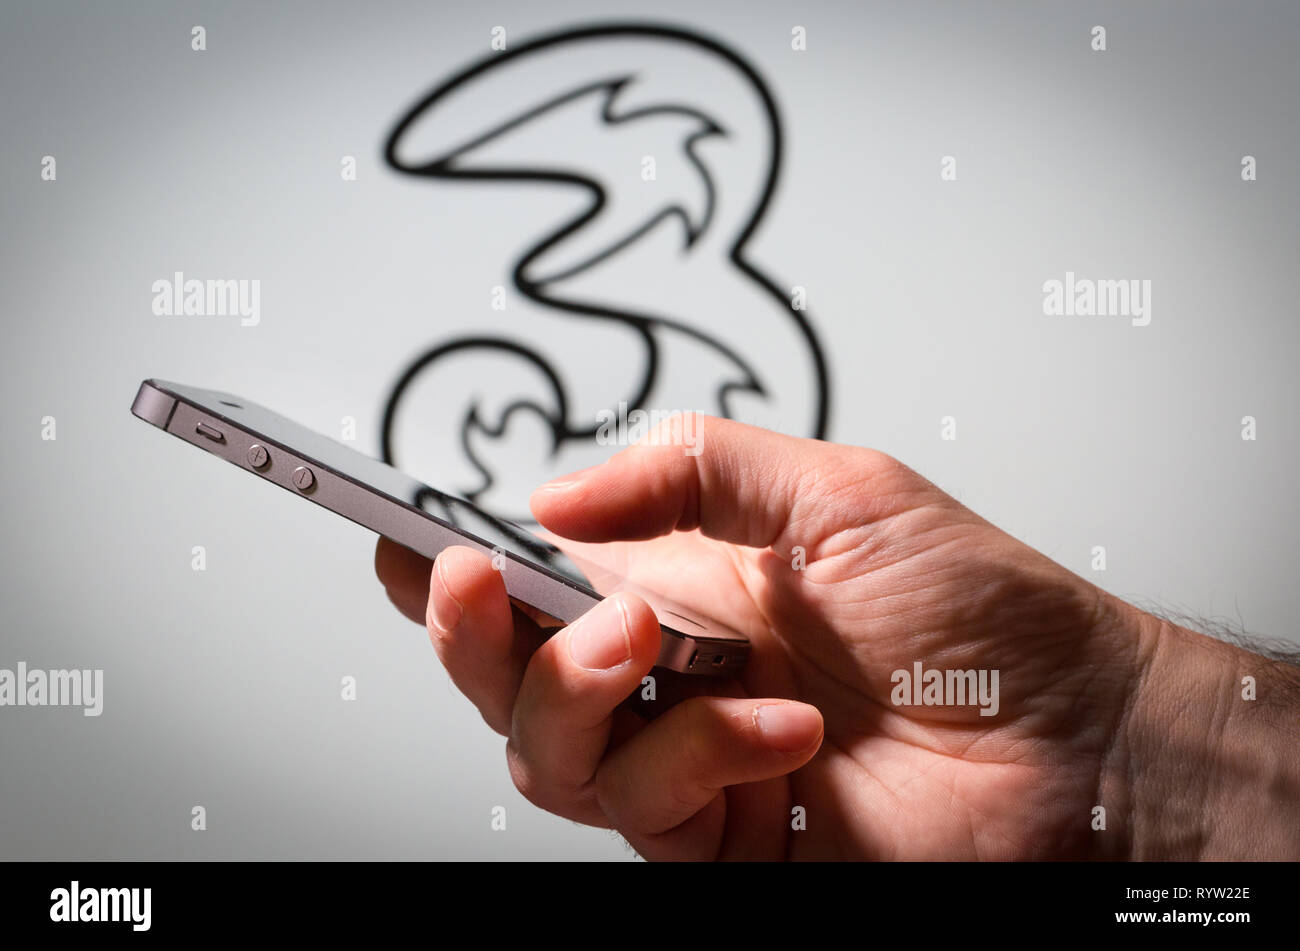 A man using a mobile phone in front of the Three Mobile network logo Stock Photo